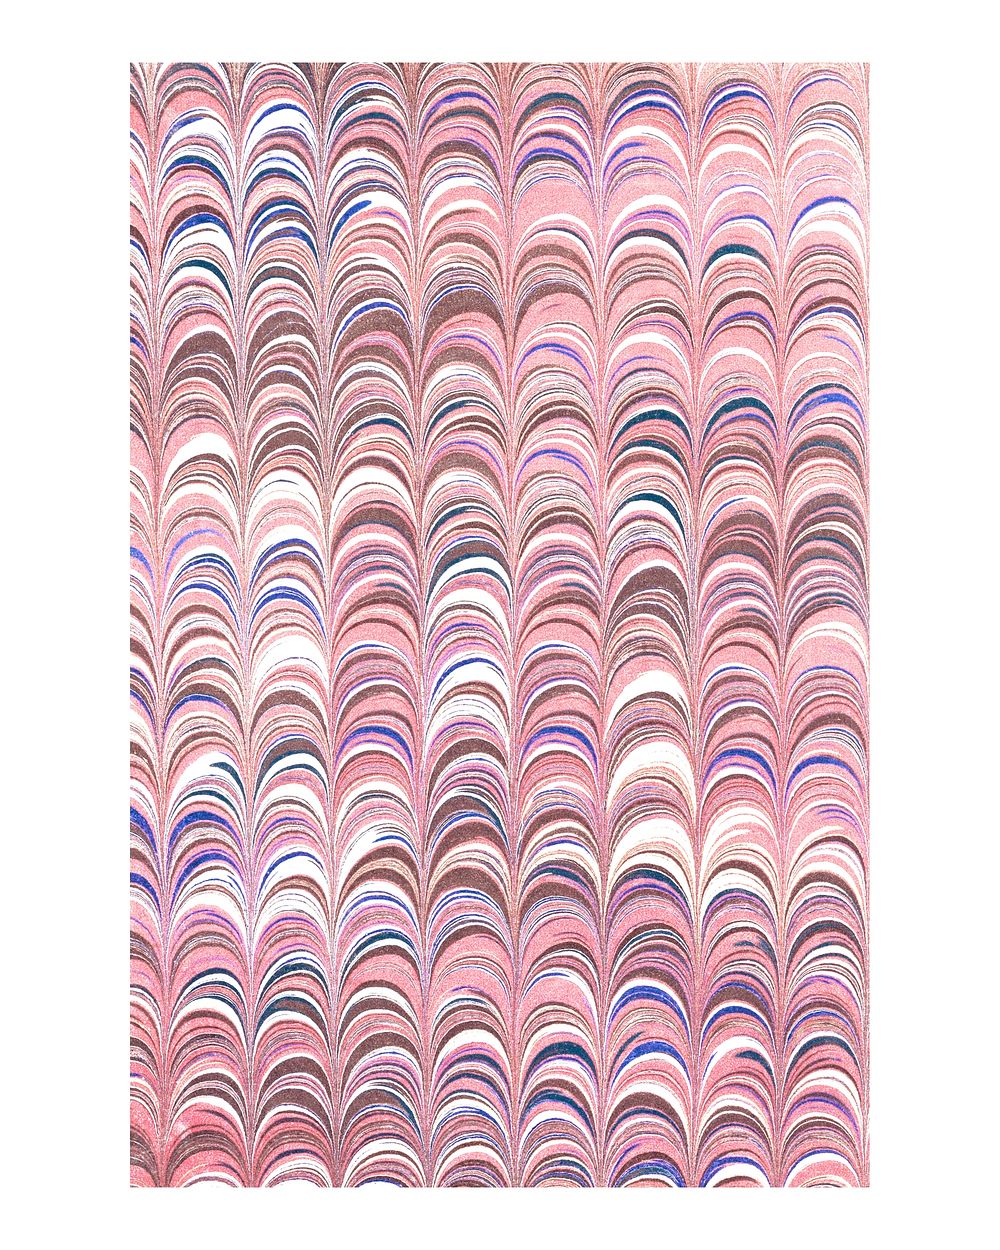 Vintage colourful wave pattern wall art print and poster design remix from original artwork.